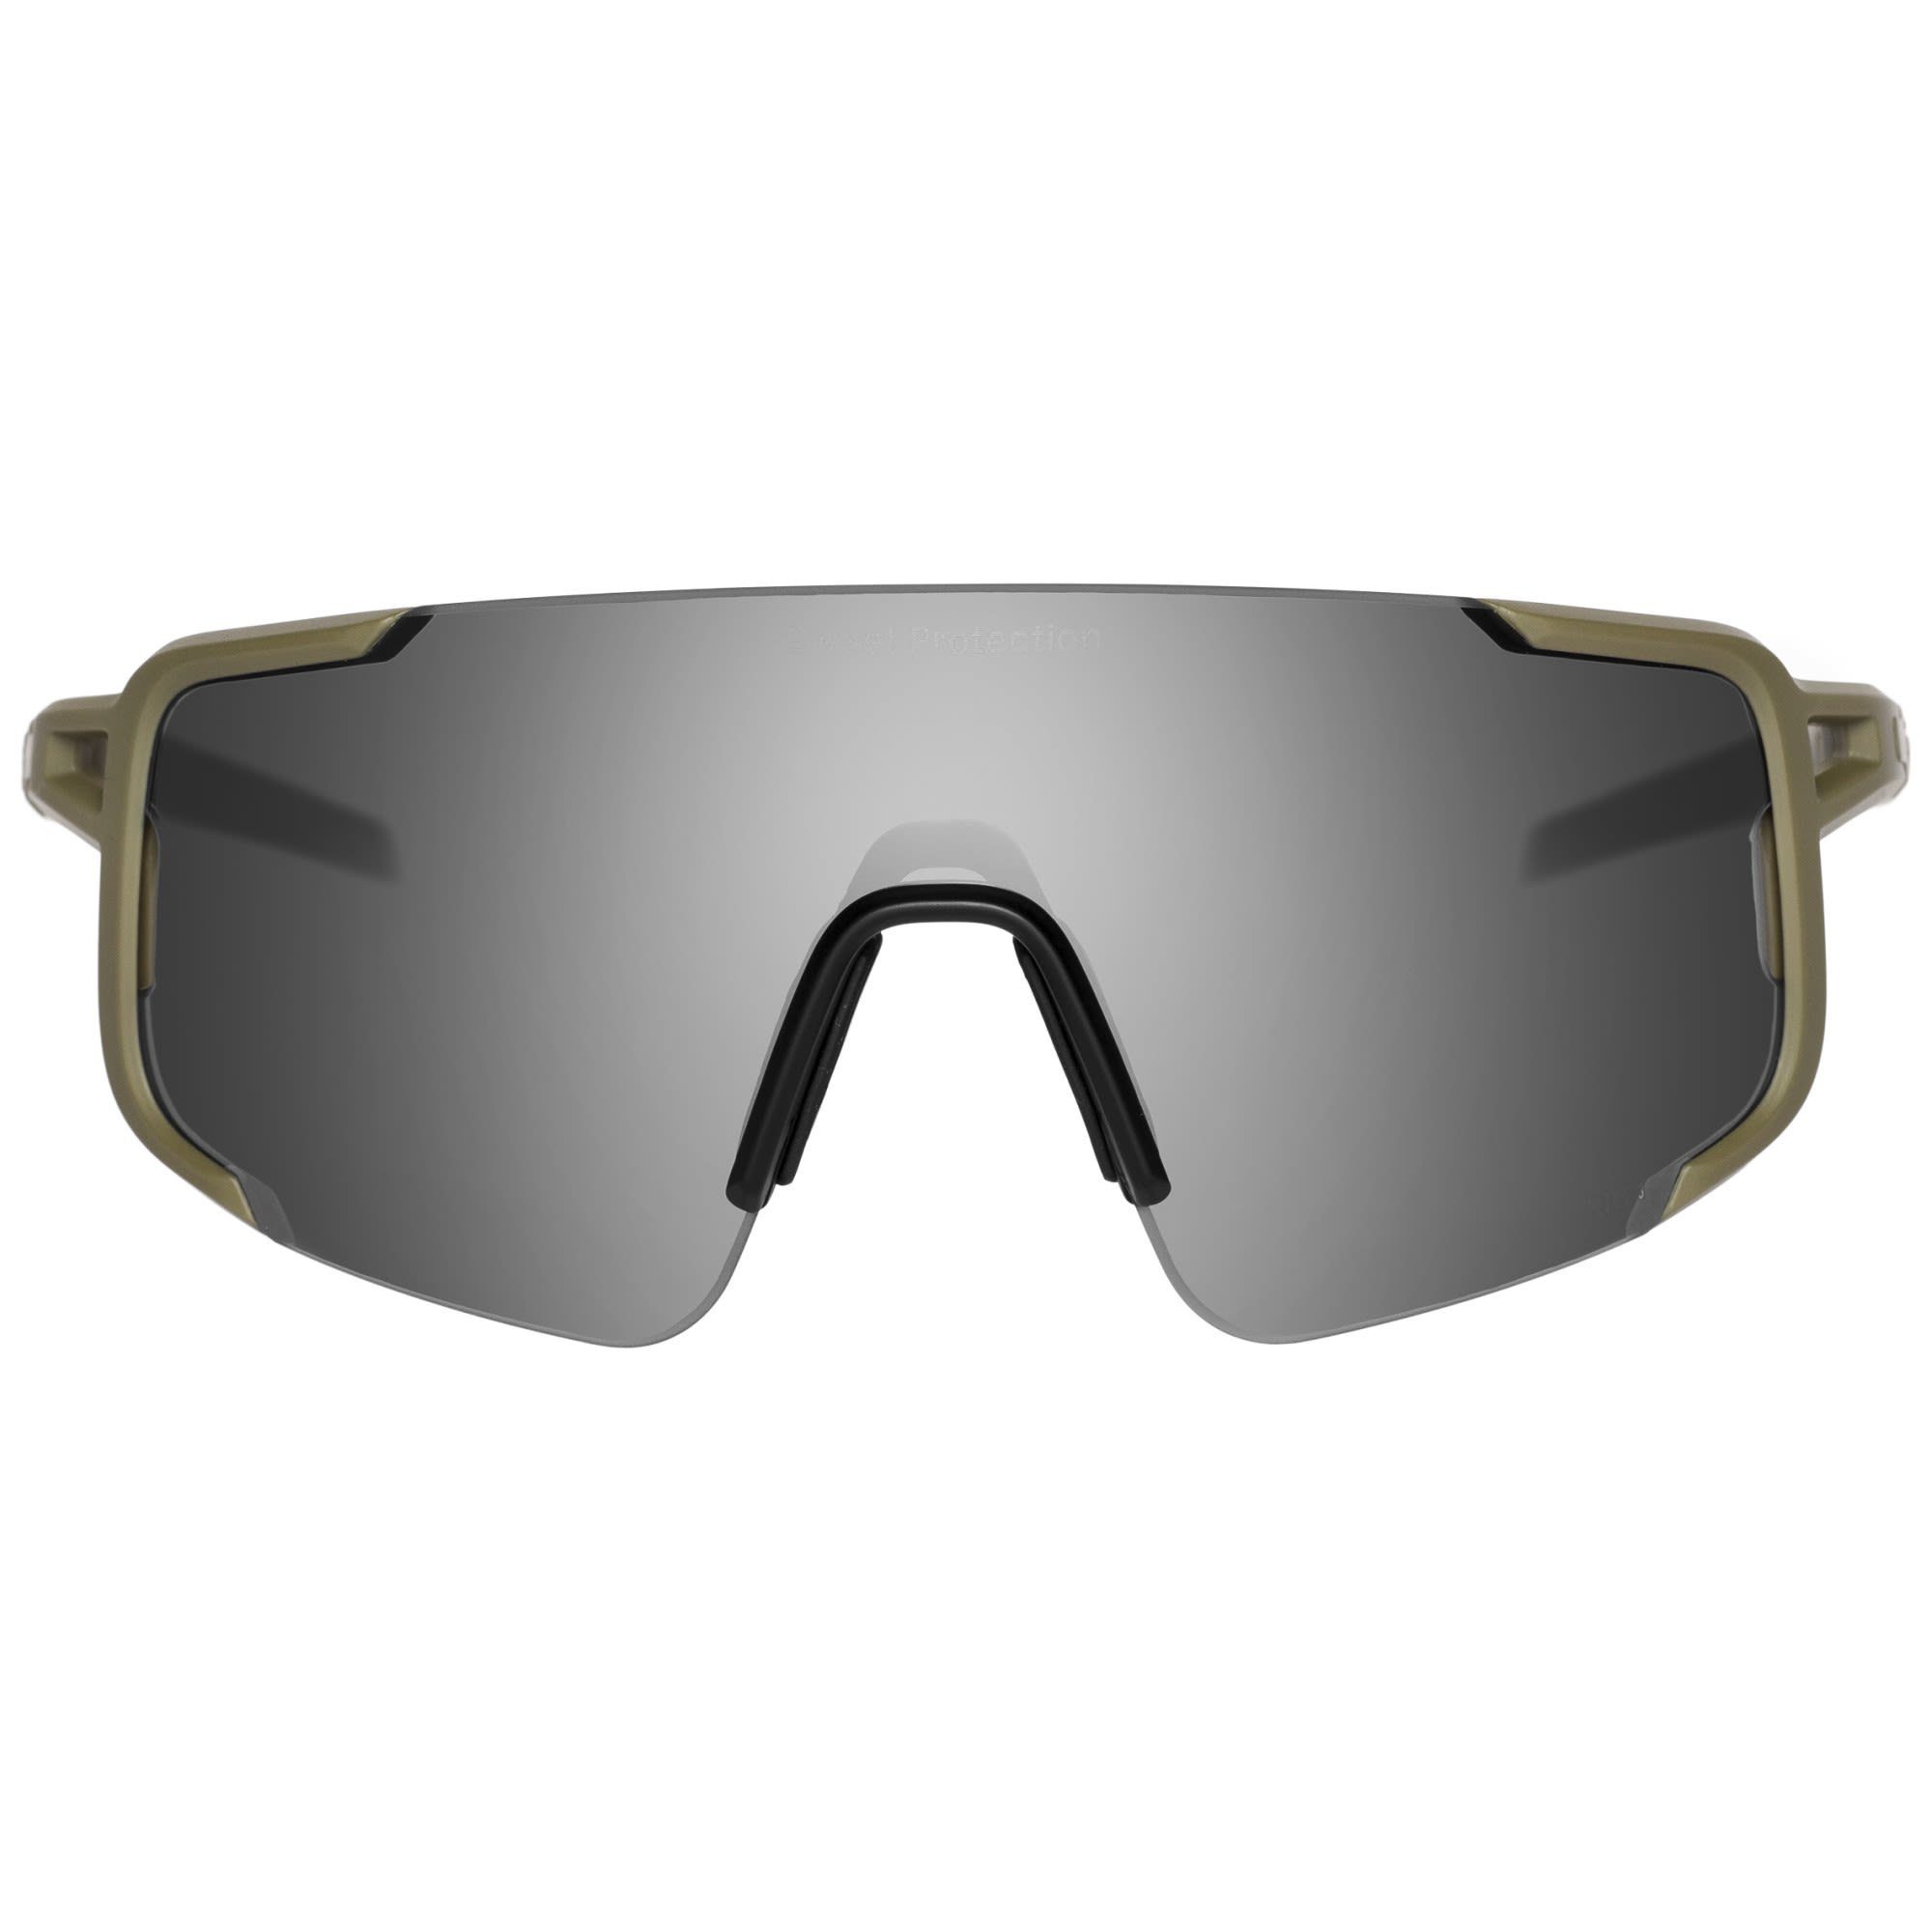 Fahrradbrille - Ronin Obsidian Accessoires Sweet Protection Rig Reflect Sweet Protection Woodland RIG